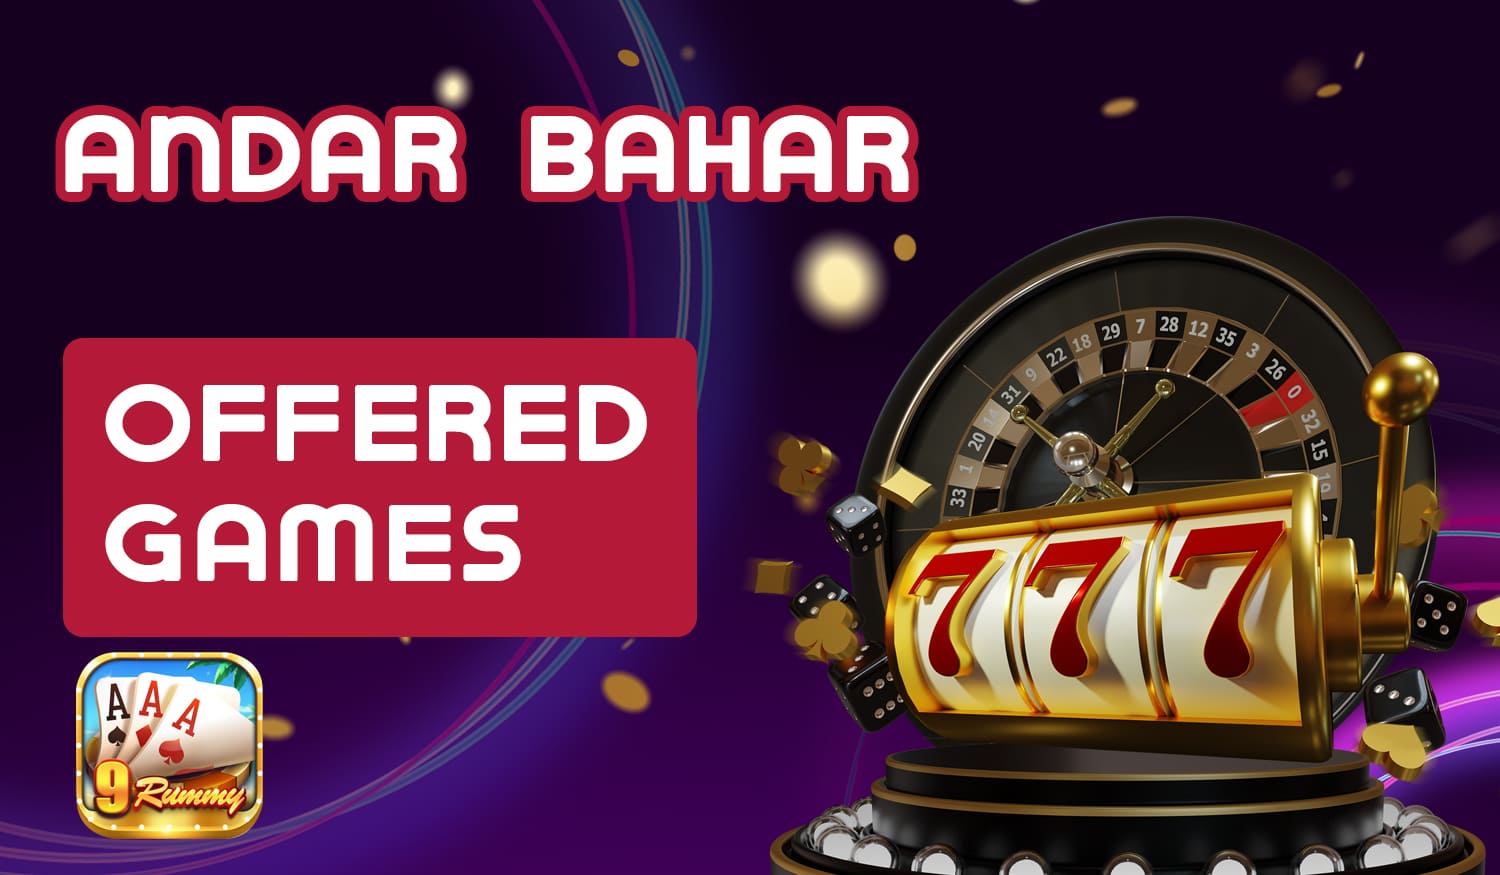 Games that are available for 9 Rummy users from India